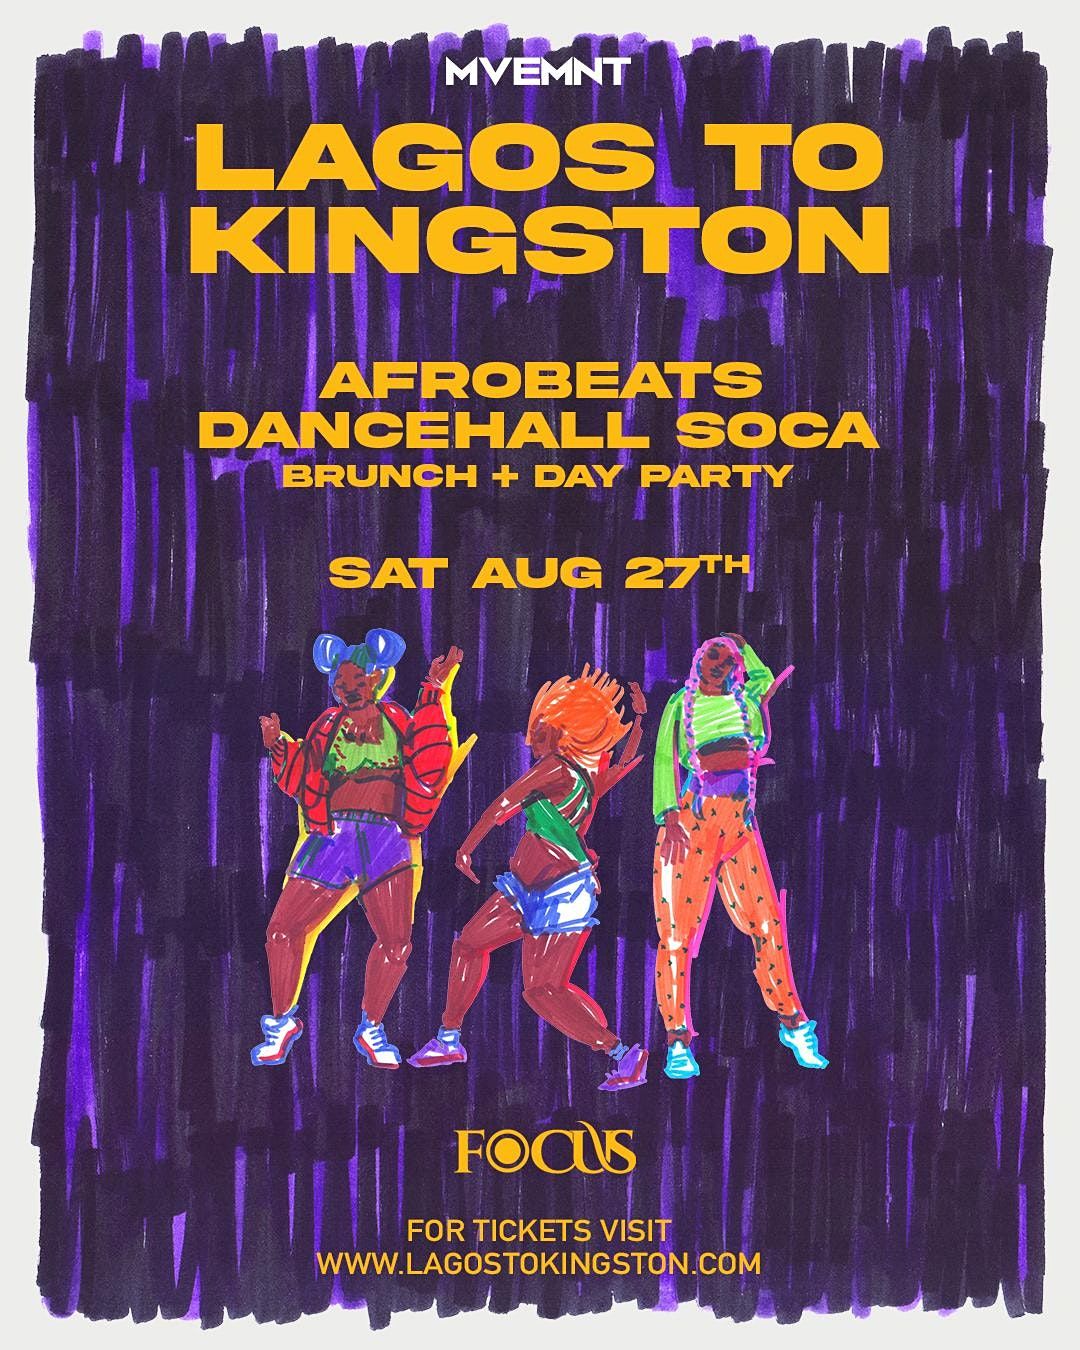 Lagos to Kingston: AfroBeats + Dancehall + Soca: Brunch + Day Party